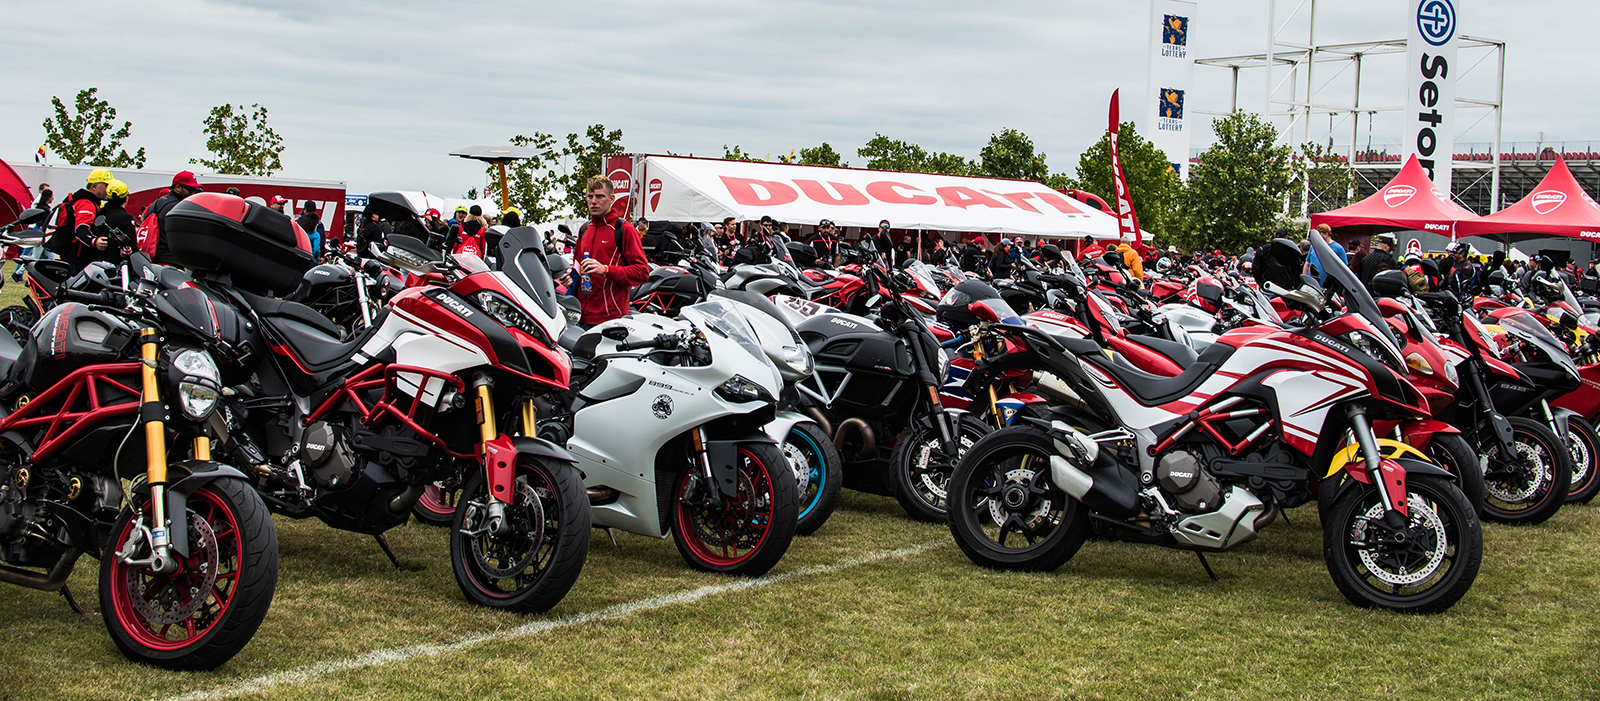 A view of attendees at the 2019 Ducati Island Experience, enjoying the Ducati lineup.